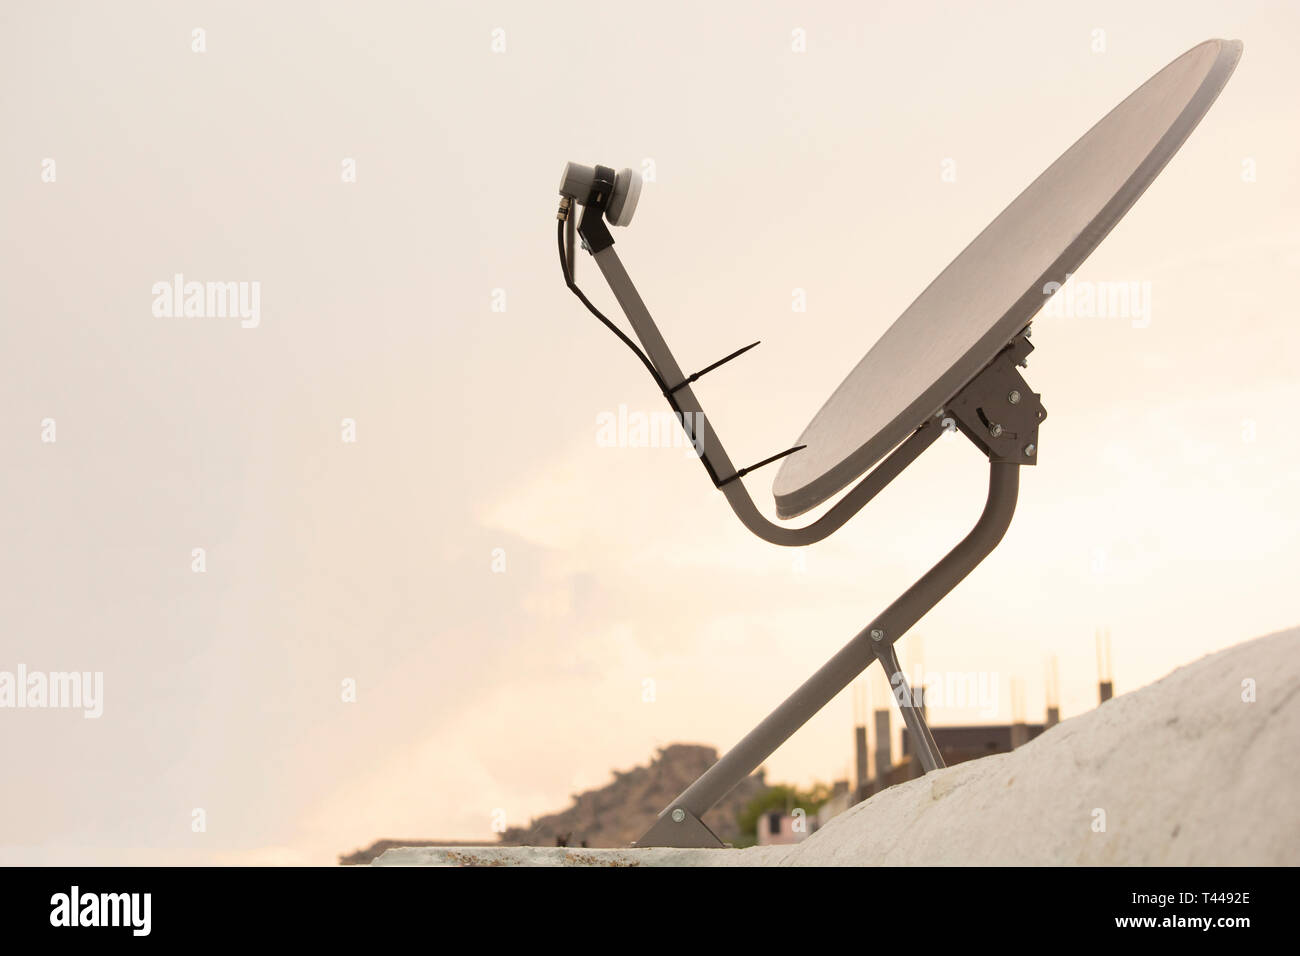 Installed Satellite dish or DTH or Direct to home tv on the roof Stock Photo